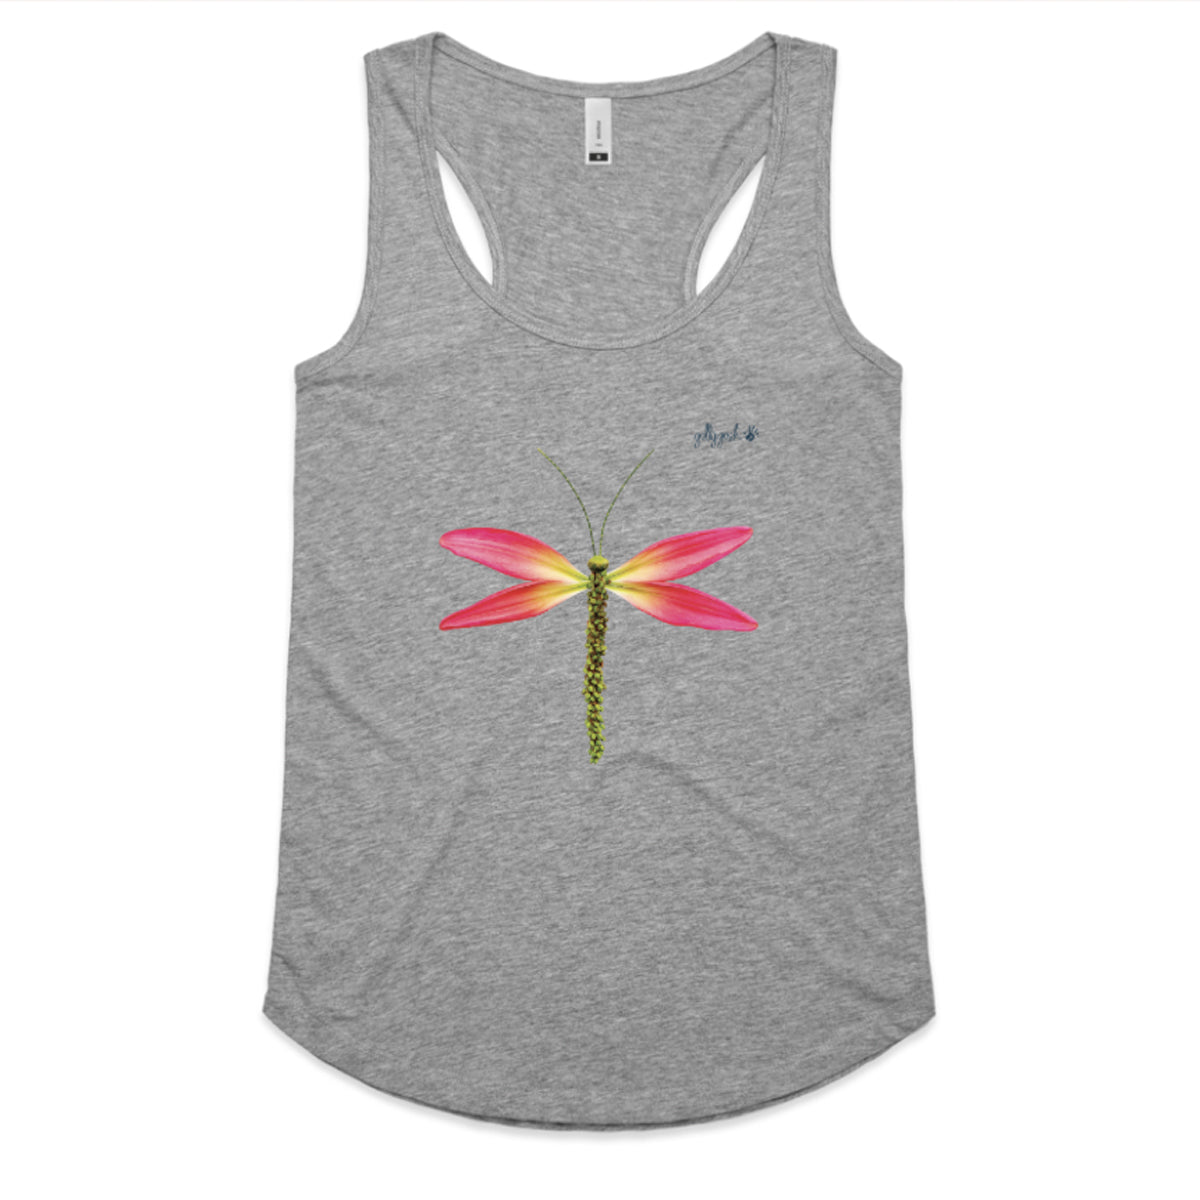 Pink Lily Dragonfly Racerback Singlet